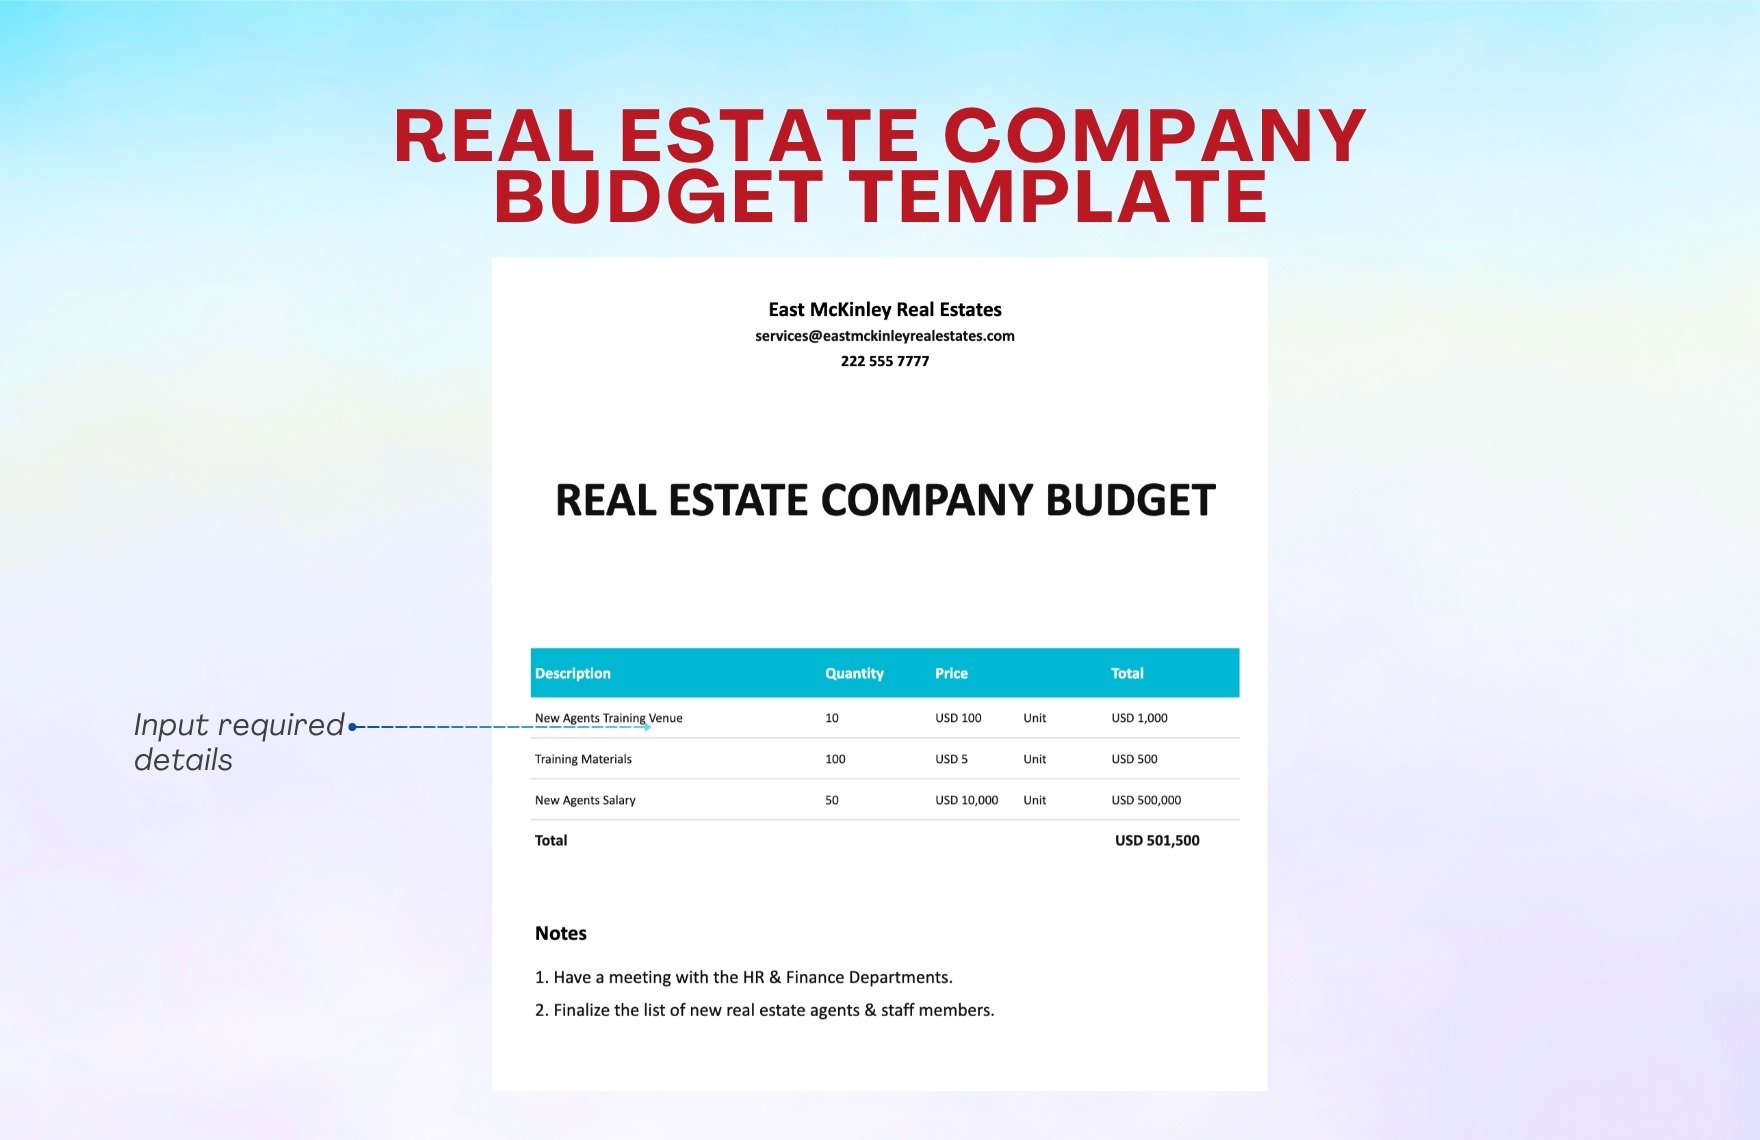 Real Estate Company Budget Template